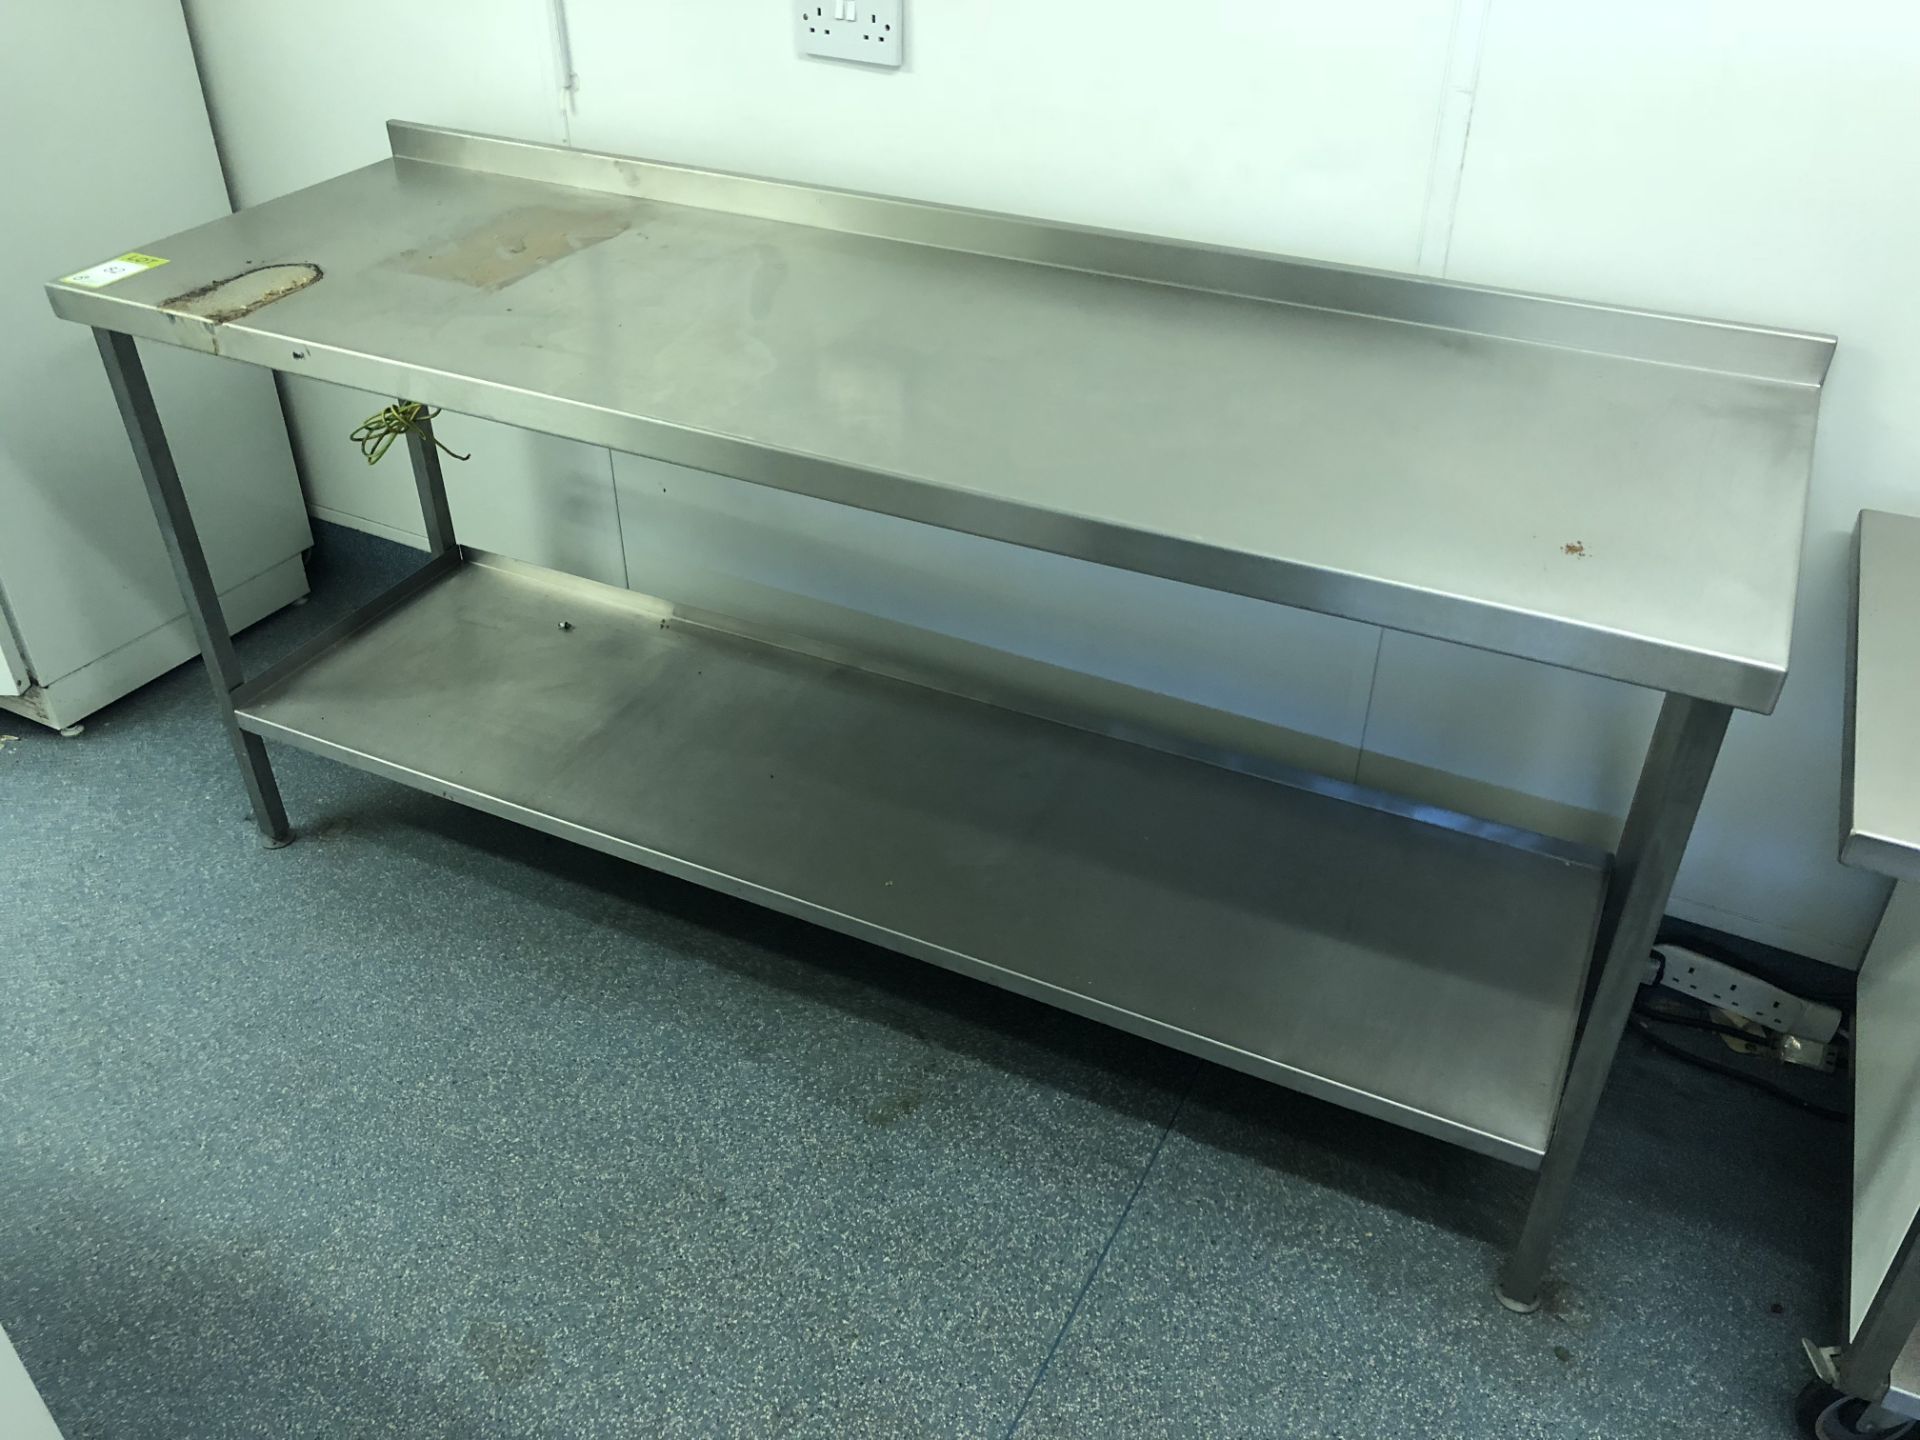 Stainless steel Preparation Table, 1900mm x 600mm, with lip and shelf under (located in Snack